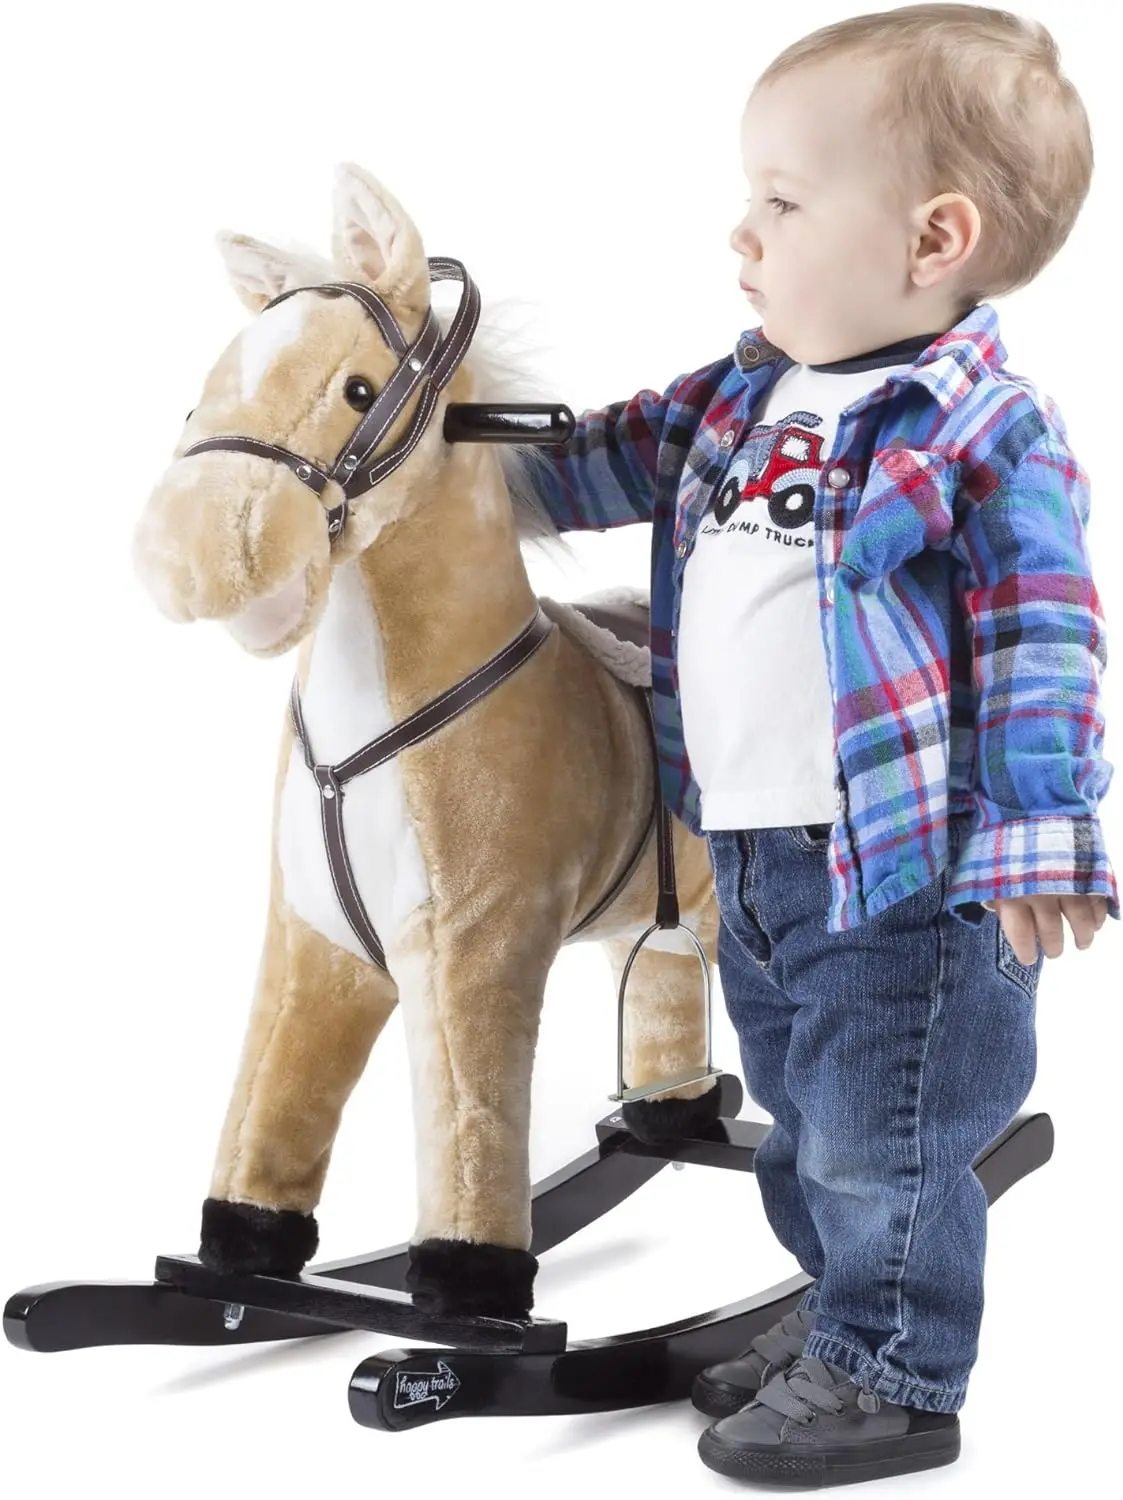 Rocking Horse Plush Animal on Wooden Rockers with Sounds, Stirrups, Saddle & Reins, Ride on Toy, Toddlers to 4 Years Brown Large images - 6